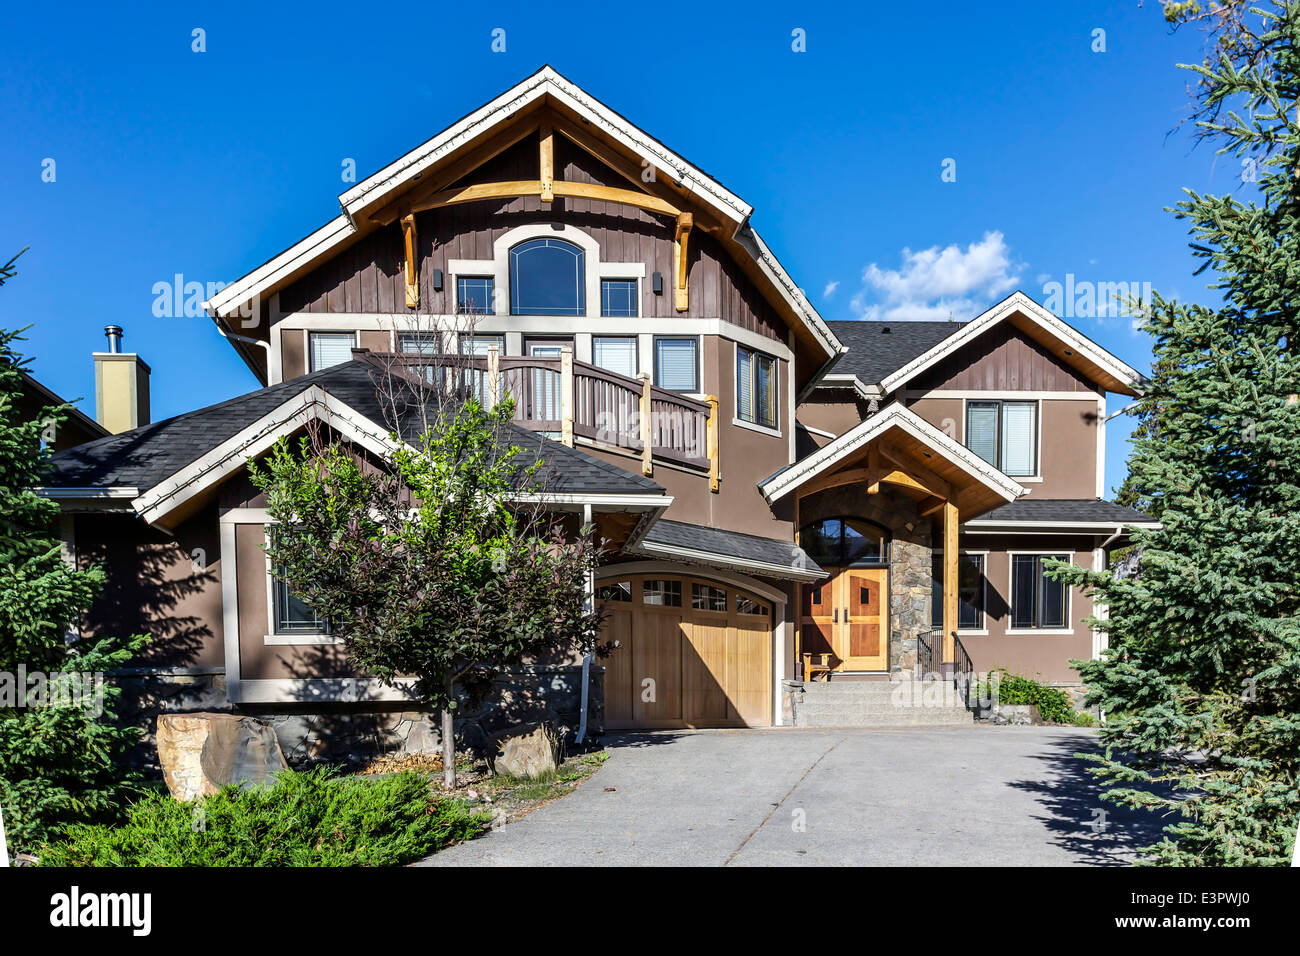 Western American style home in suburbia. Stock Photo